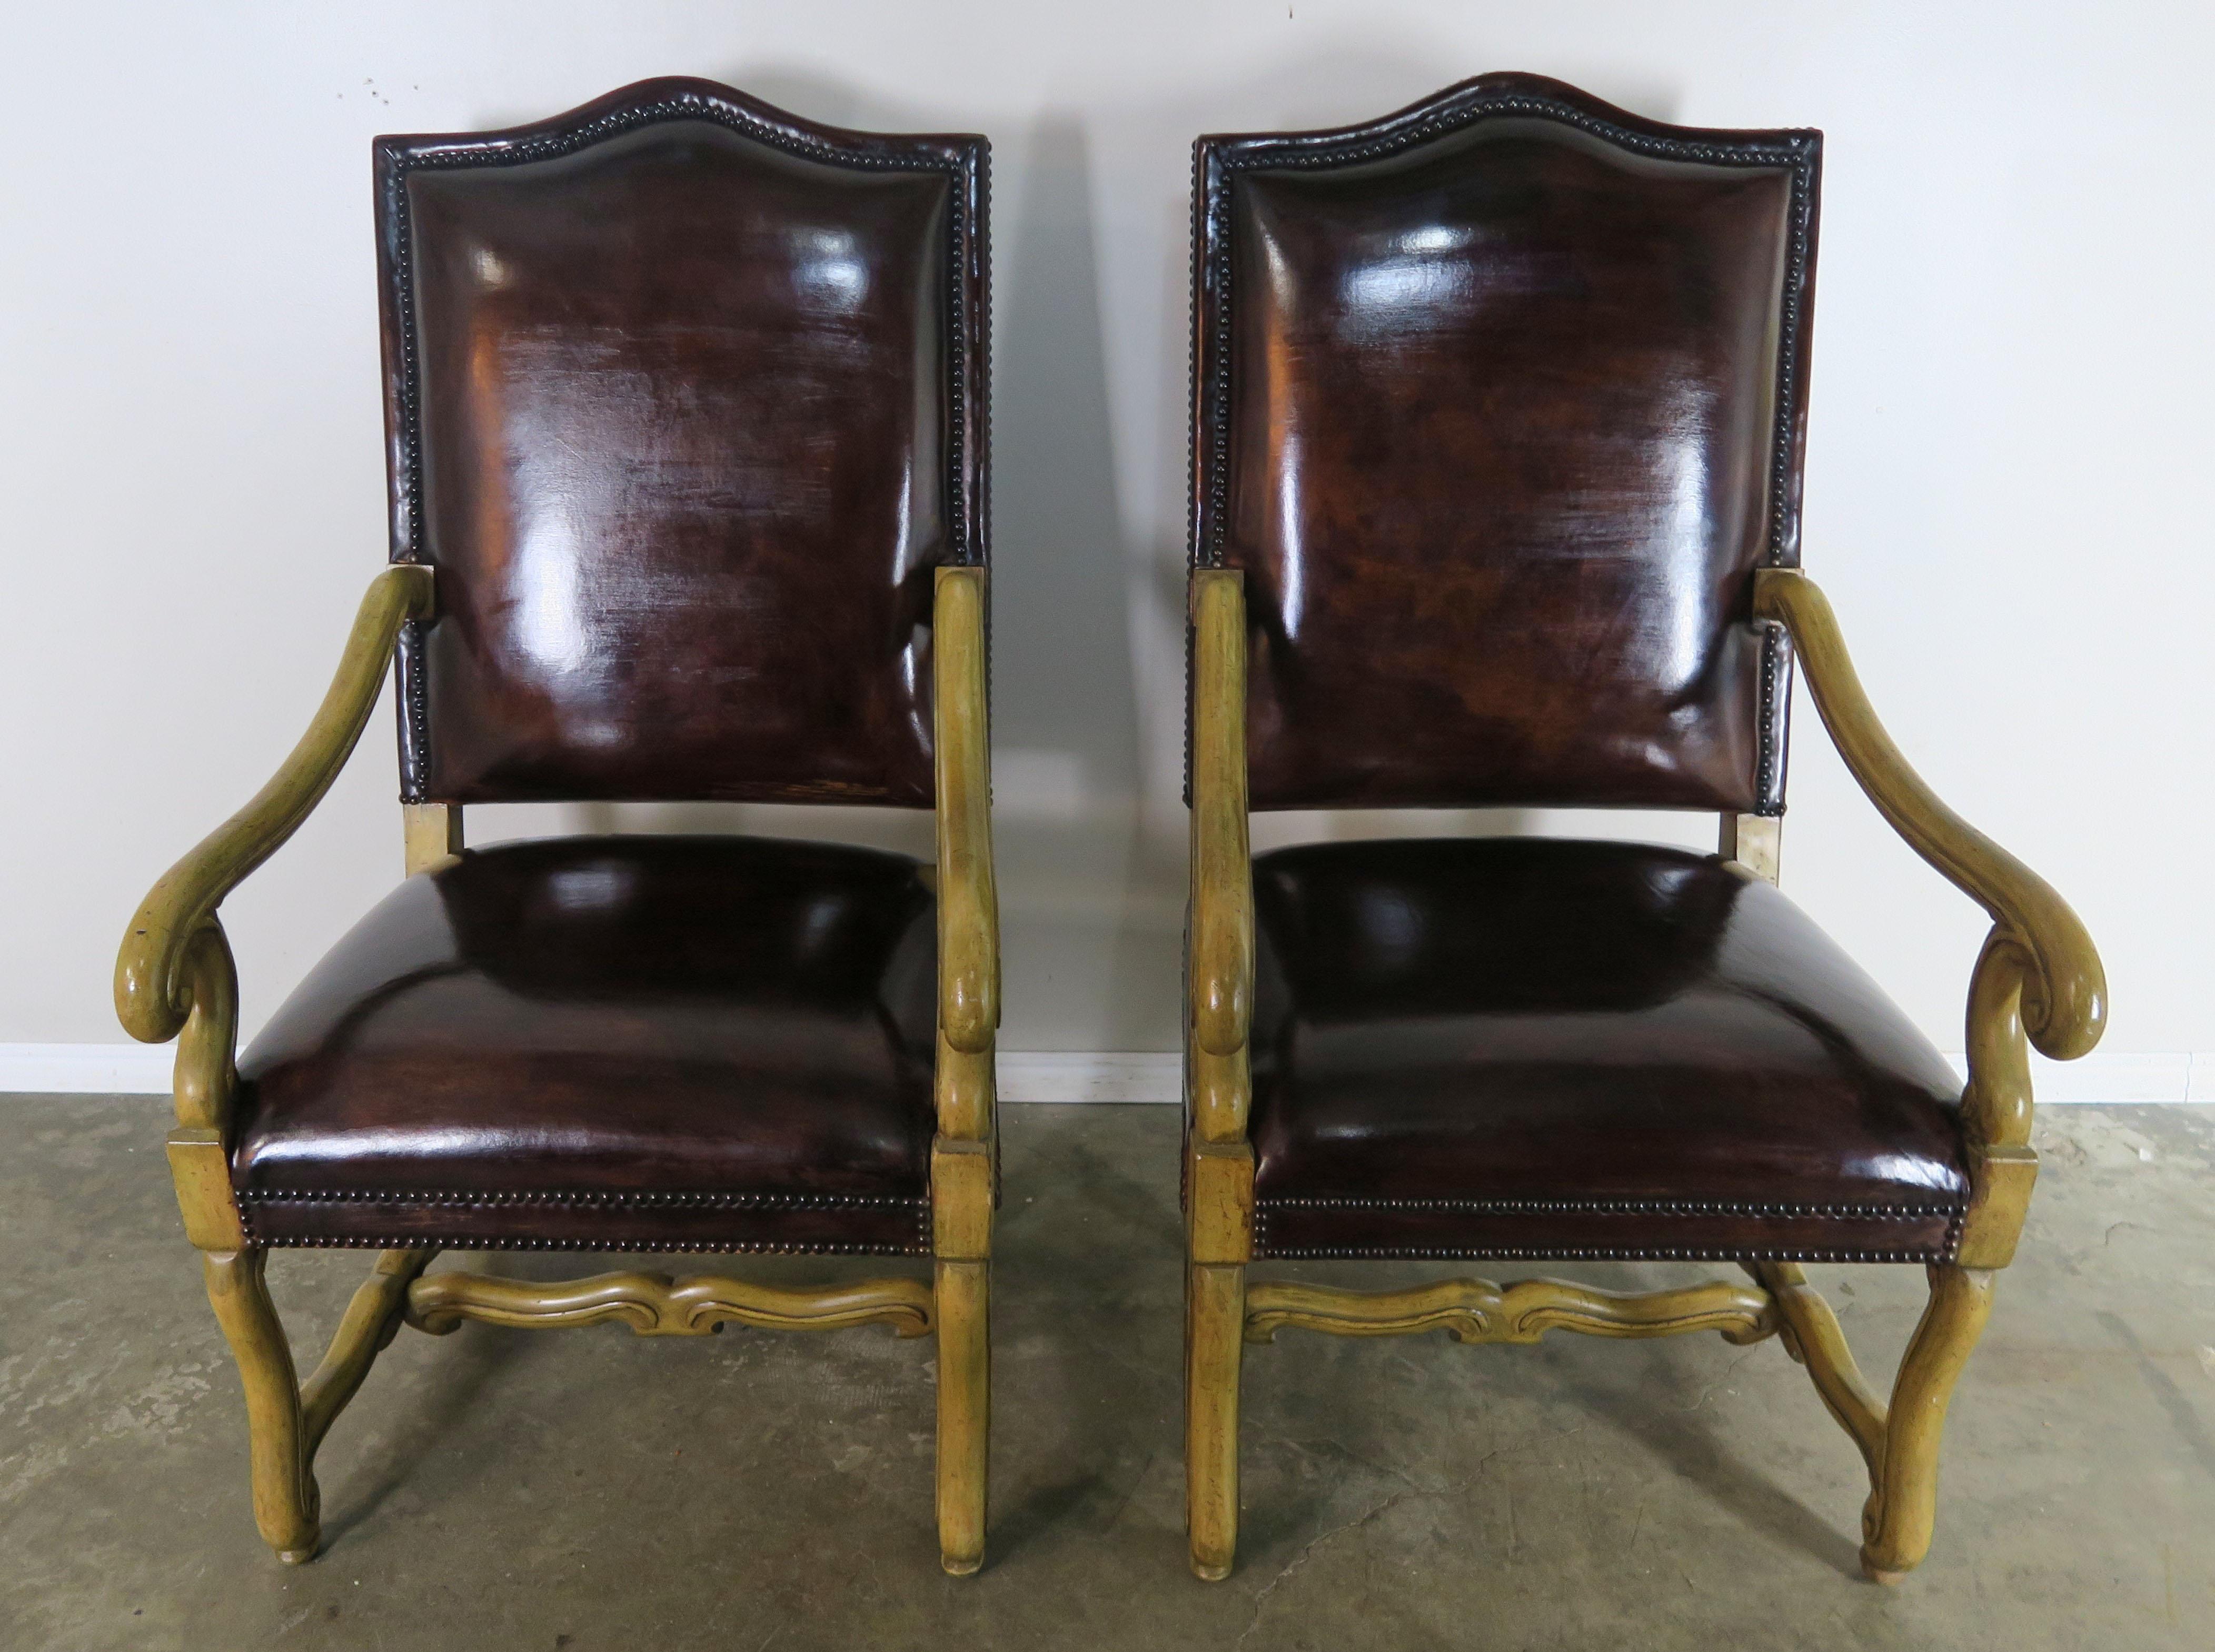 Pair of Spanish style bleached walnut armchairs with dark brown leather upholstery.
Seat height 20